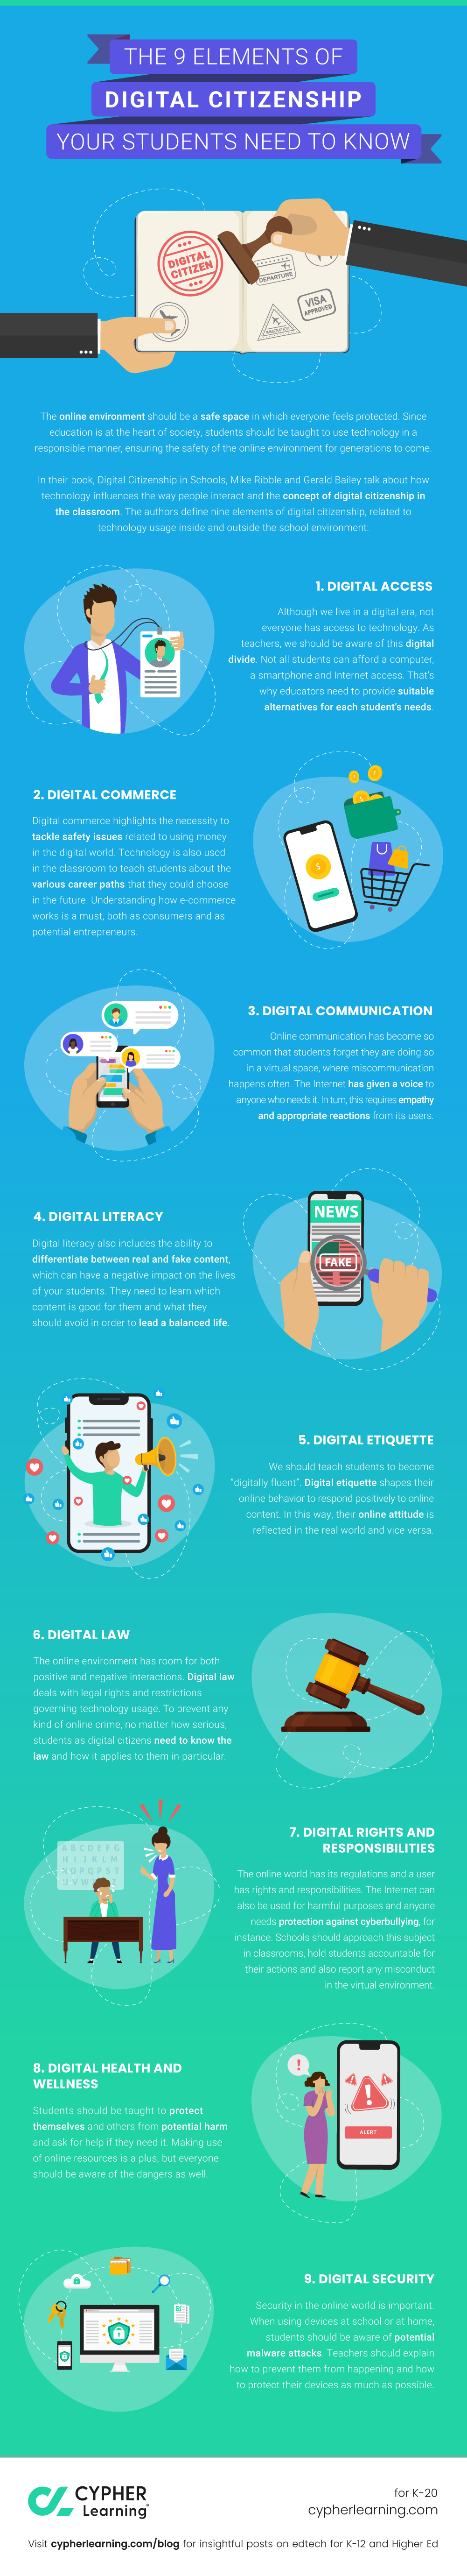 the-9-elements-of-digital-citizenship-your-students-need-to-know